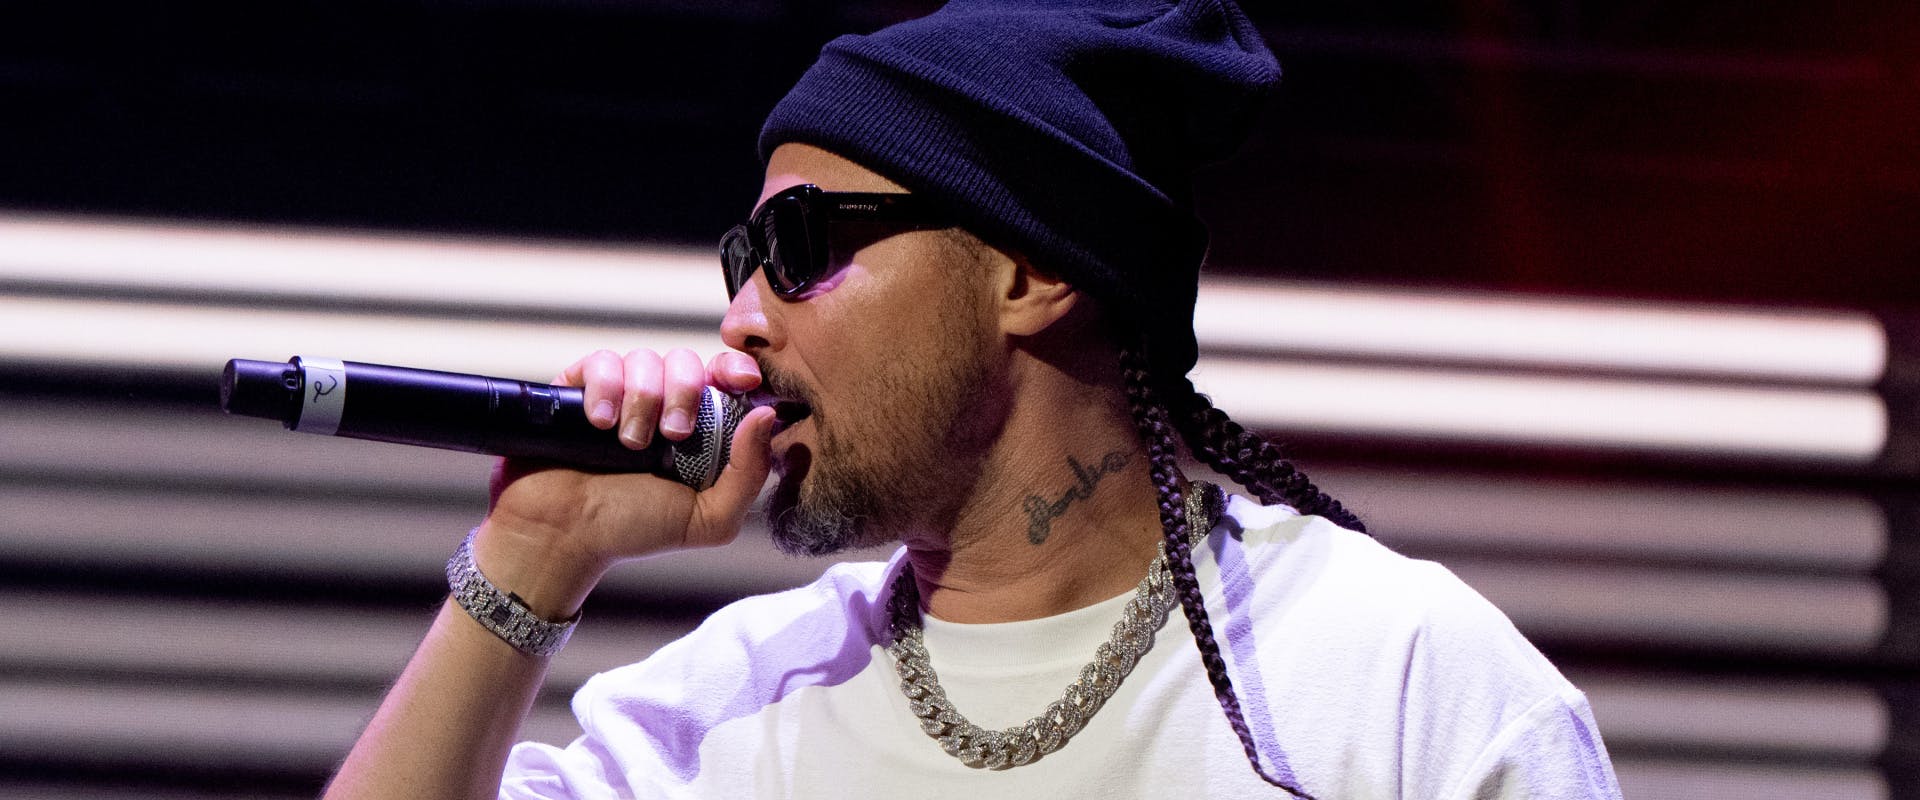 ONTARIO, CALIFORNIA - NOVEMBER 19: Rapper Bizzy Bone of Bone Thugs-N-Harmony performs onstage during the High Hopes Concert Series produced by Bobby Dee Presents at Toyota Arena on November 19, 2022 in Ontario, California. (Photo by Scott Dudelson/Getty Images)